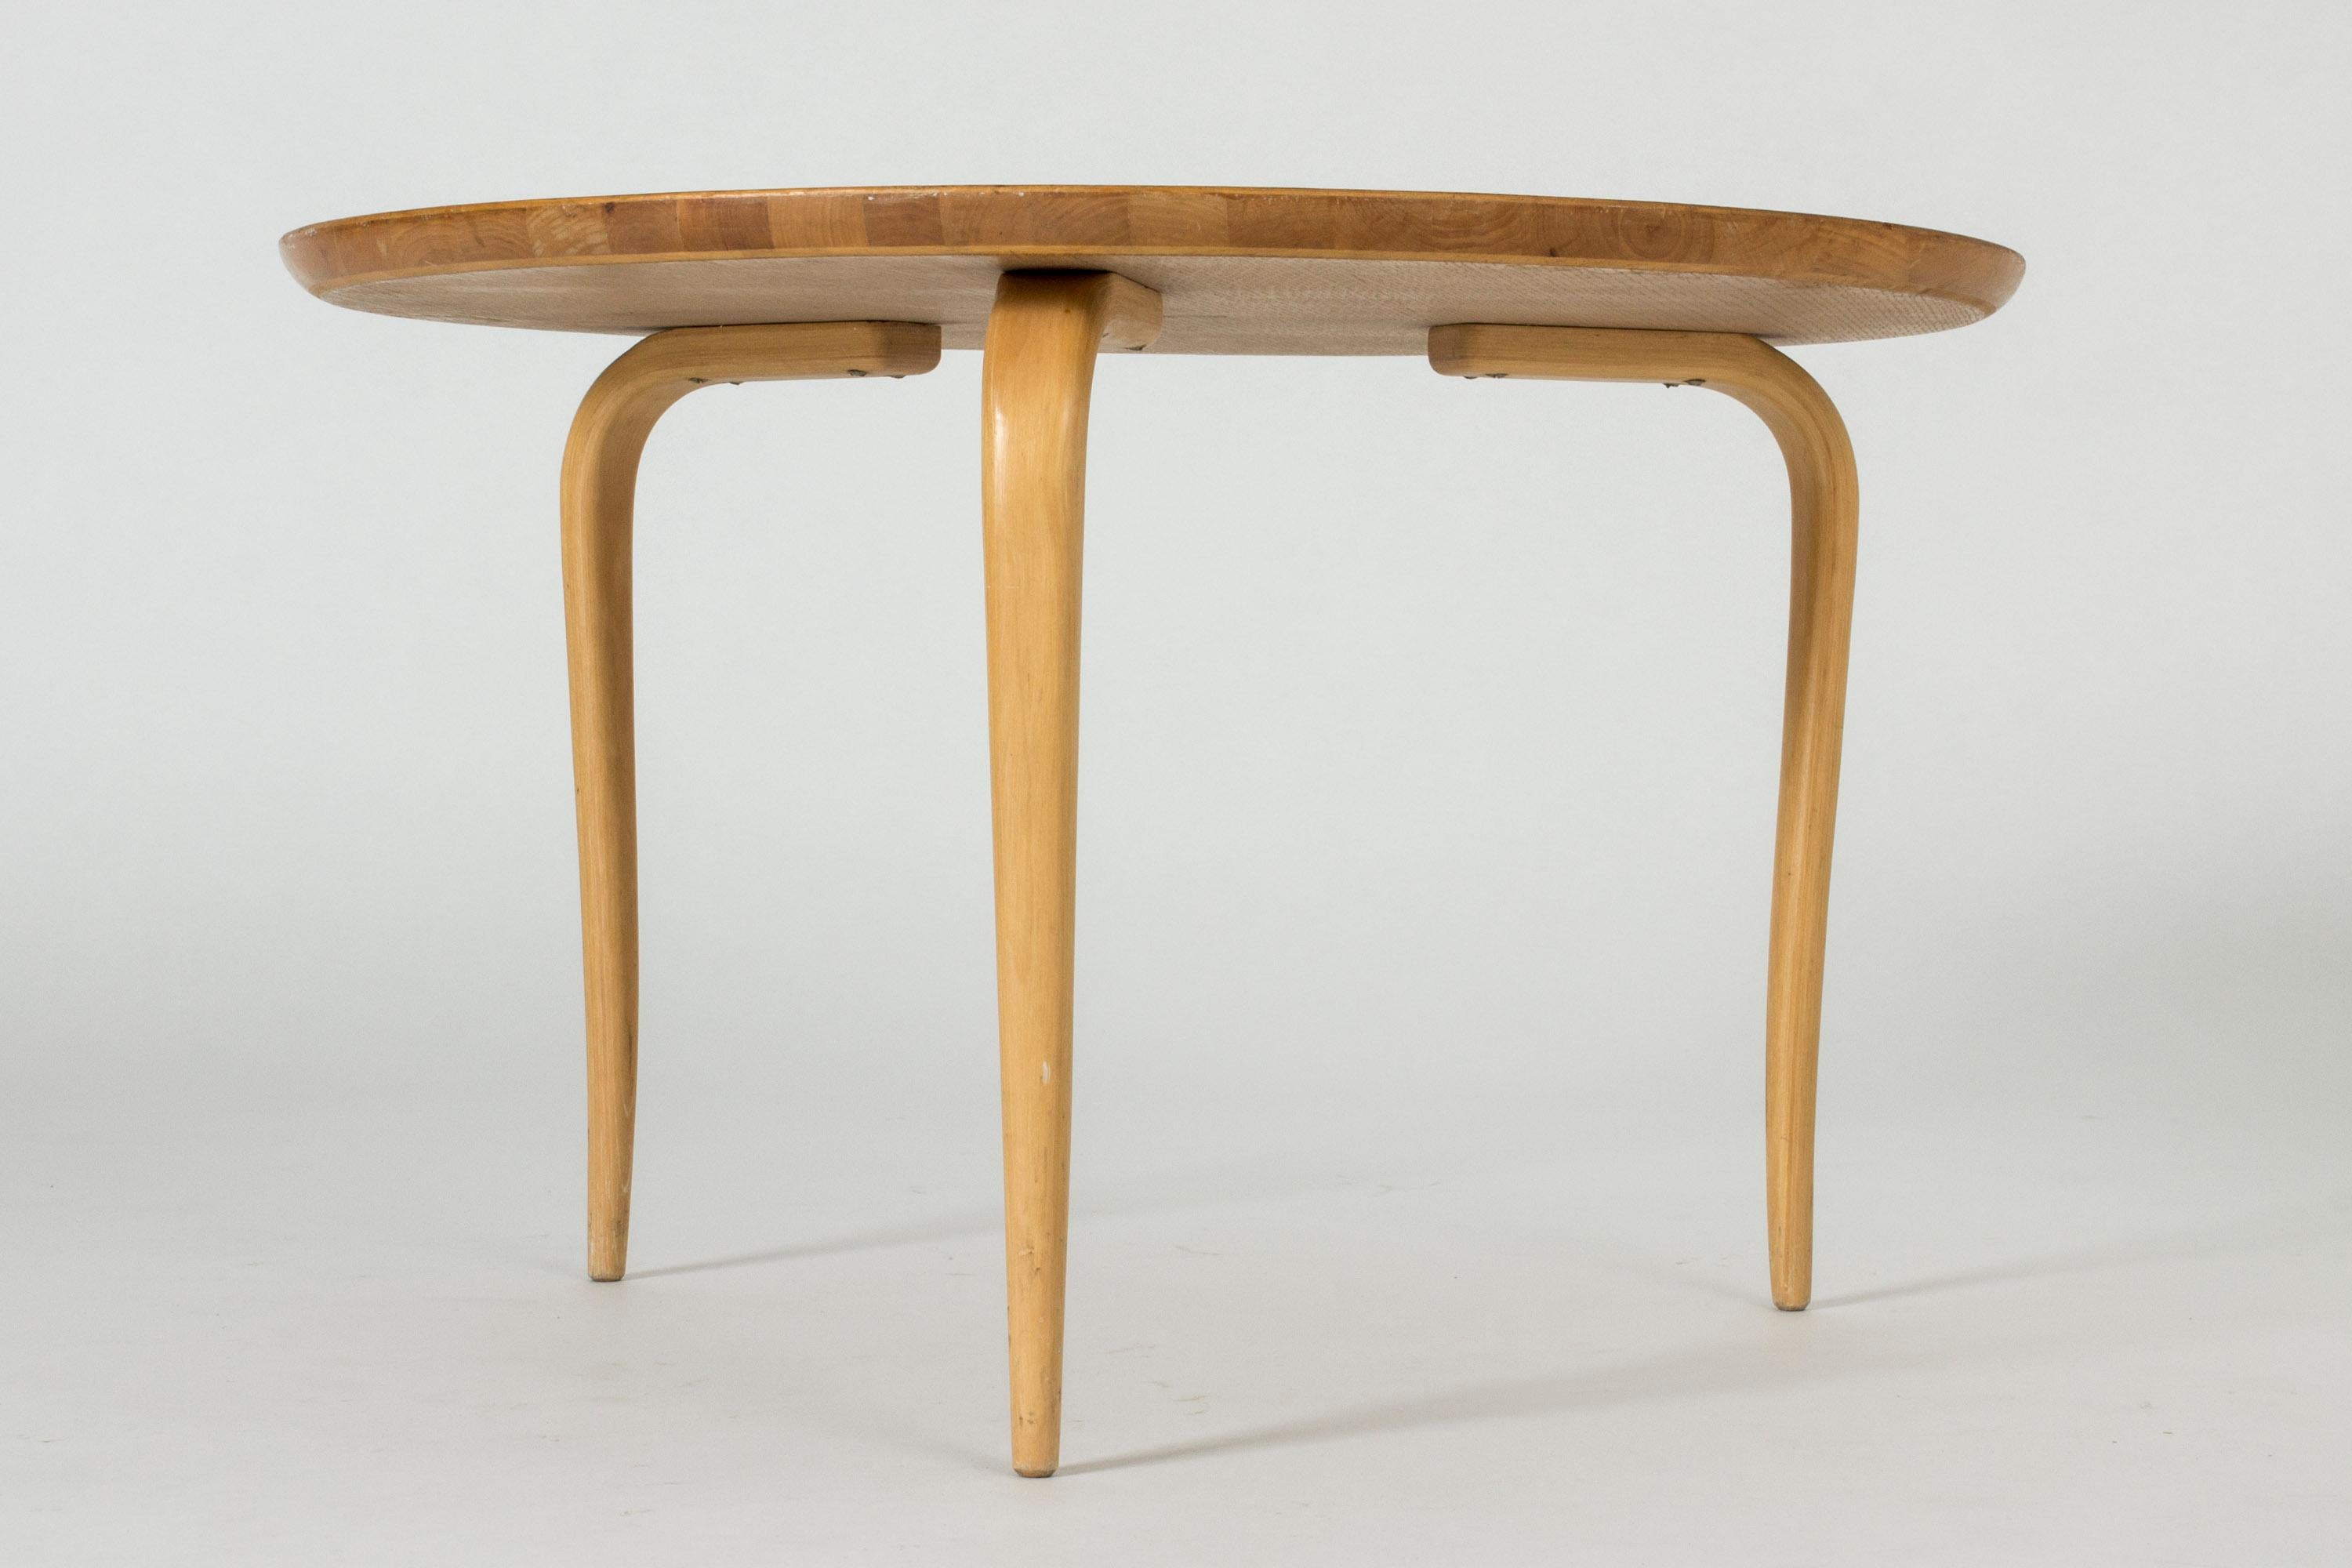 Late 20th Century “Annika” Side or Coffee Table by Bruno Mathsson